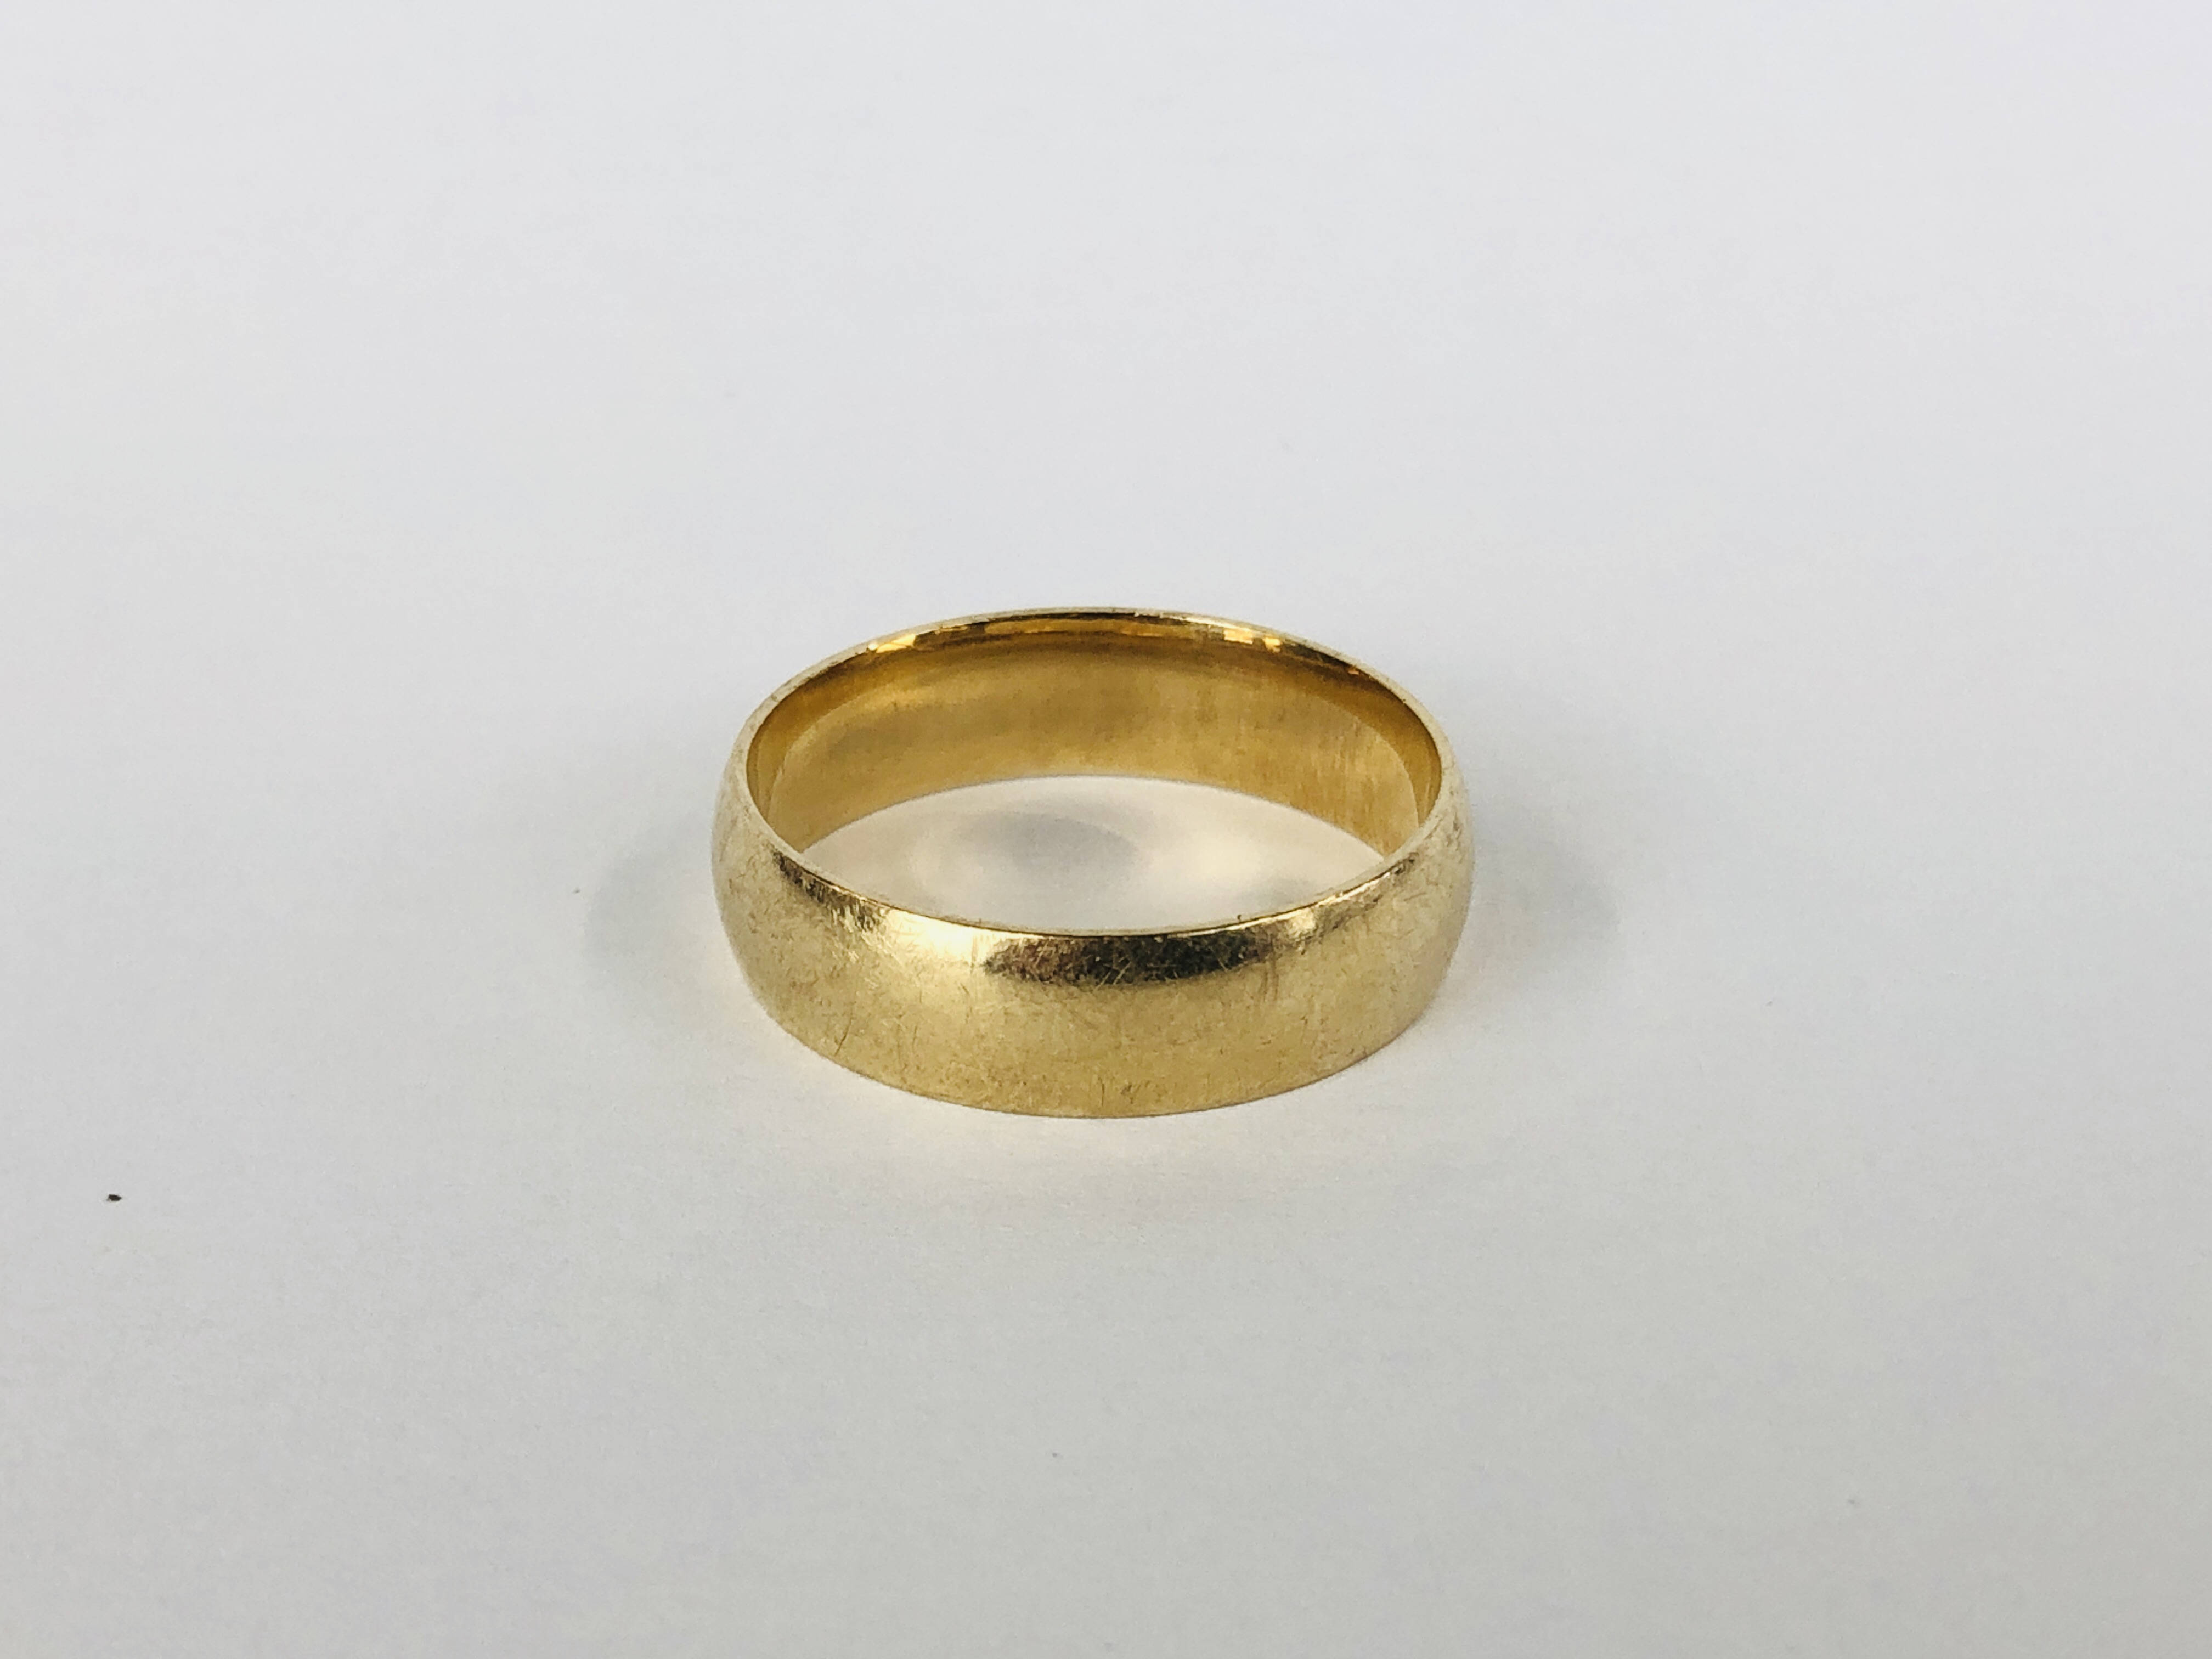 A 9CT GOLD WEDDING BAND MARKED 375.